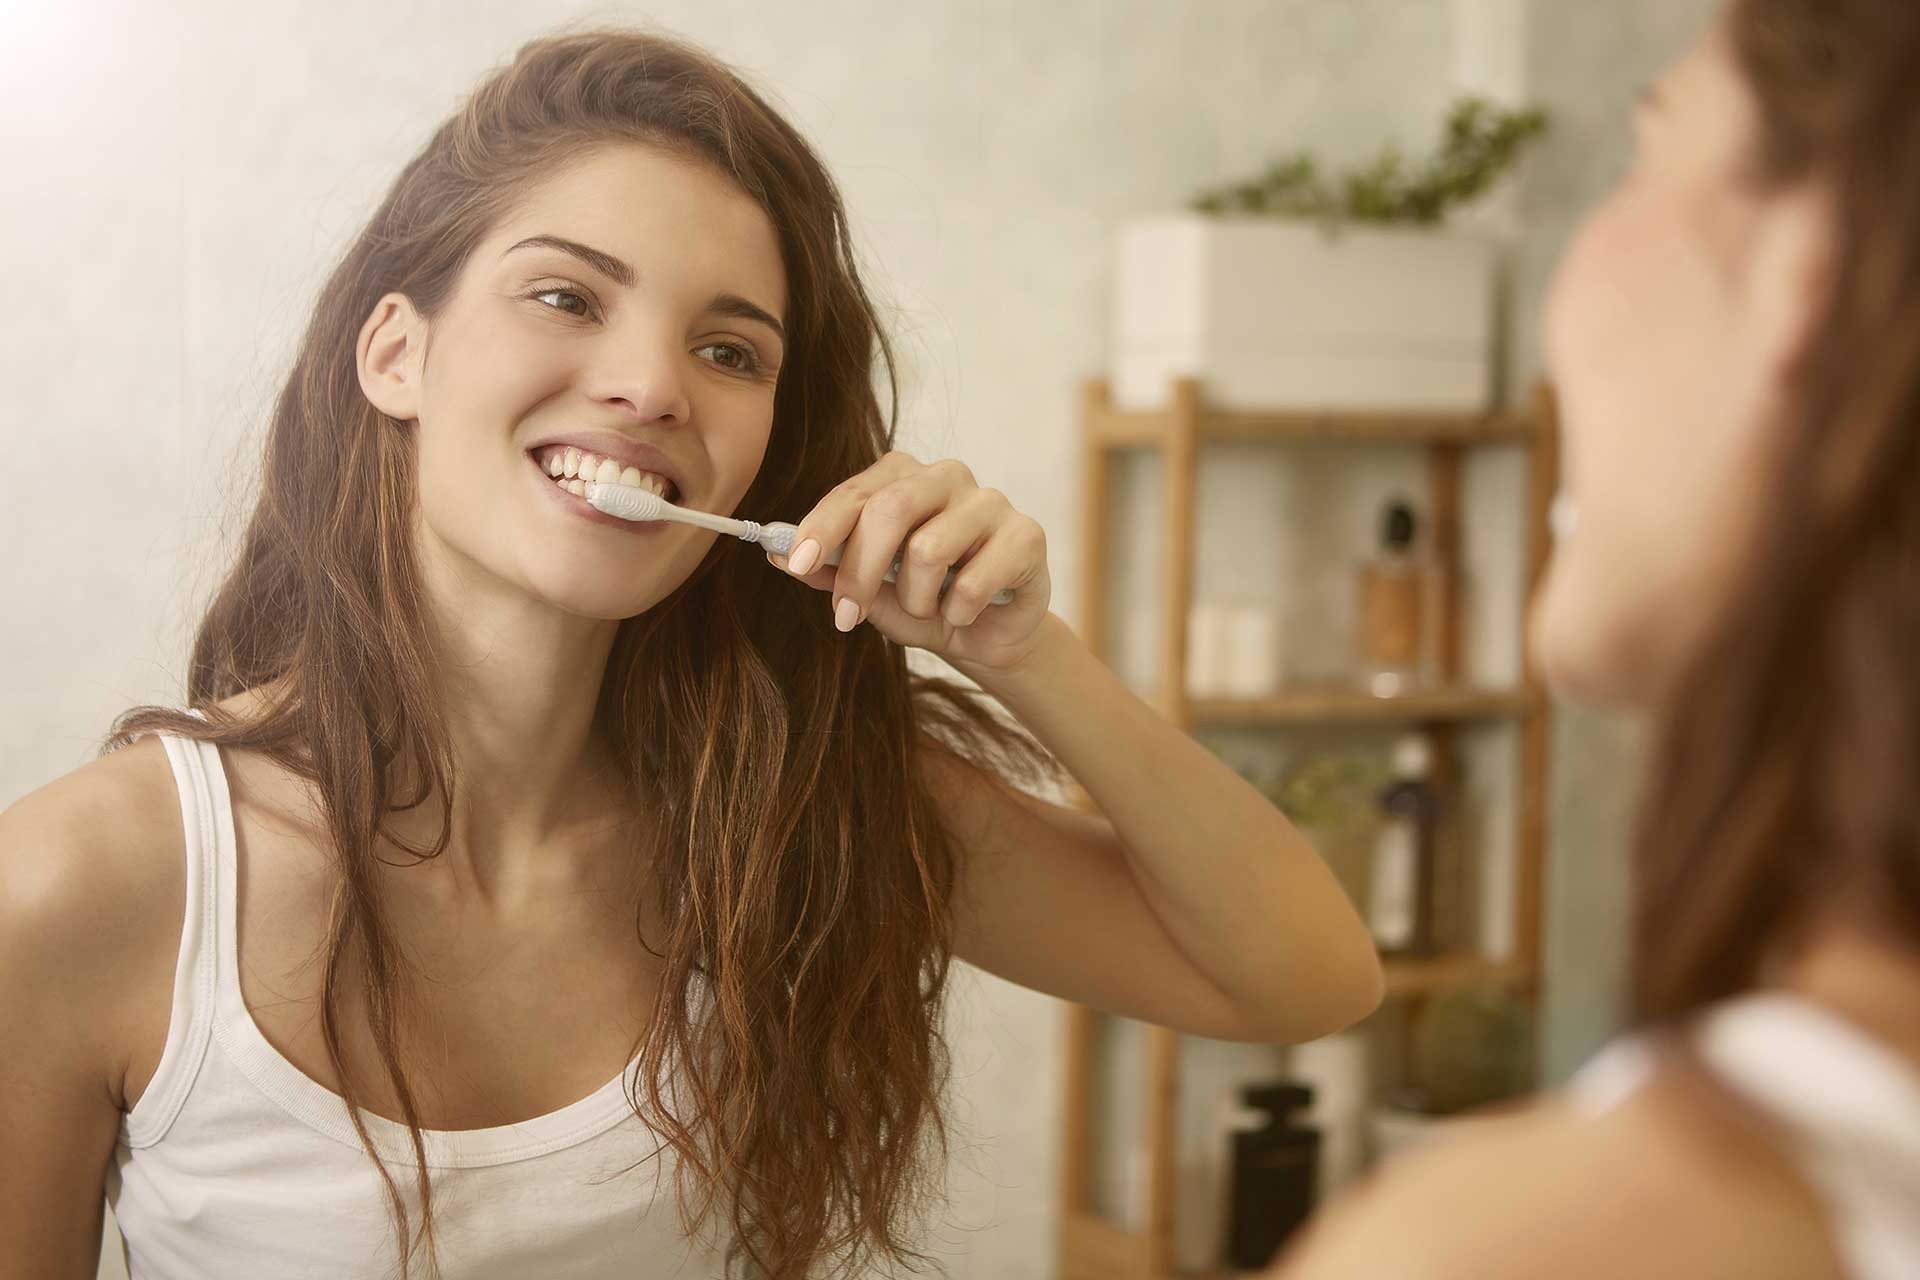 Does Overbrushing Cause Teeth to Yellow?